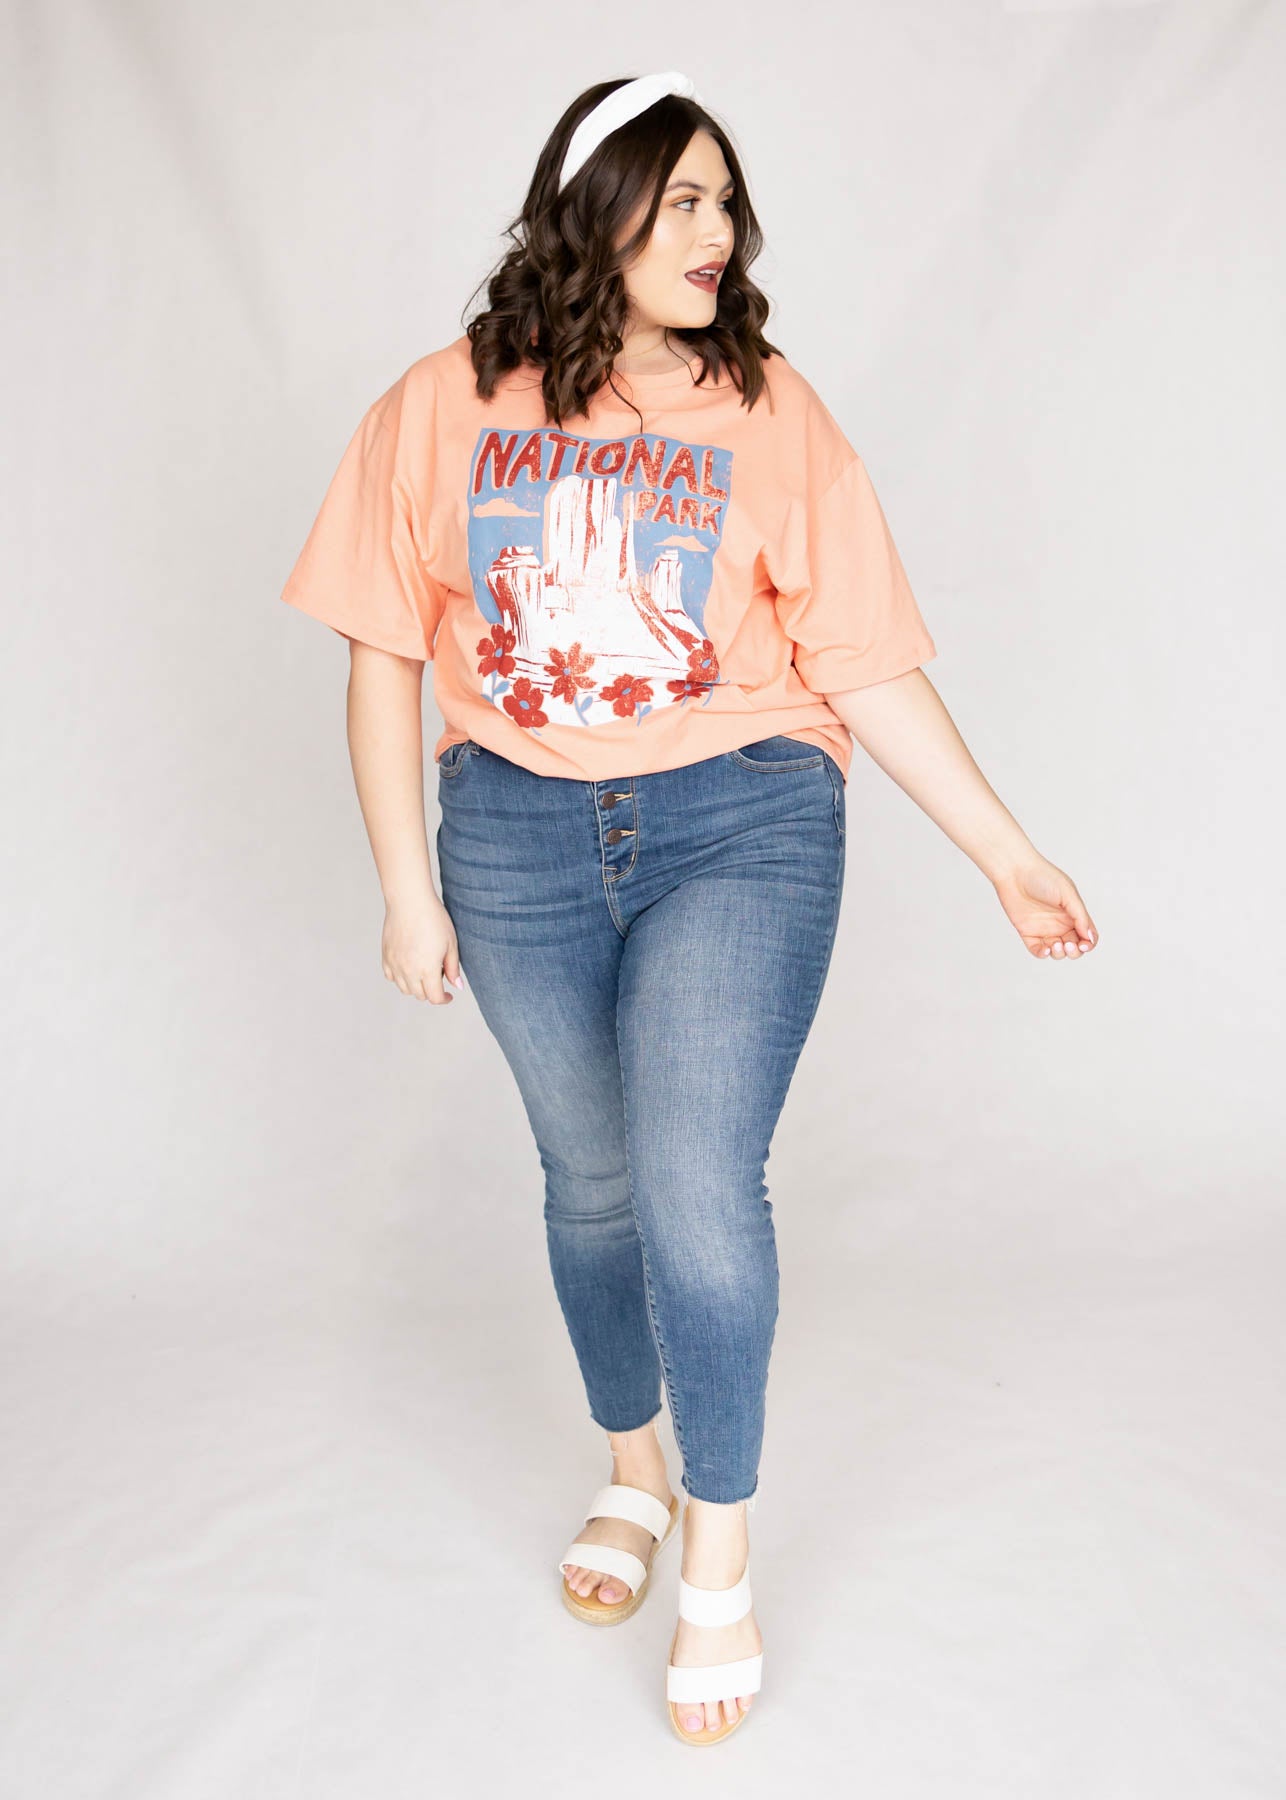 Plus size national park salmon top with short sleeves